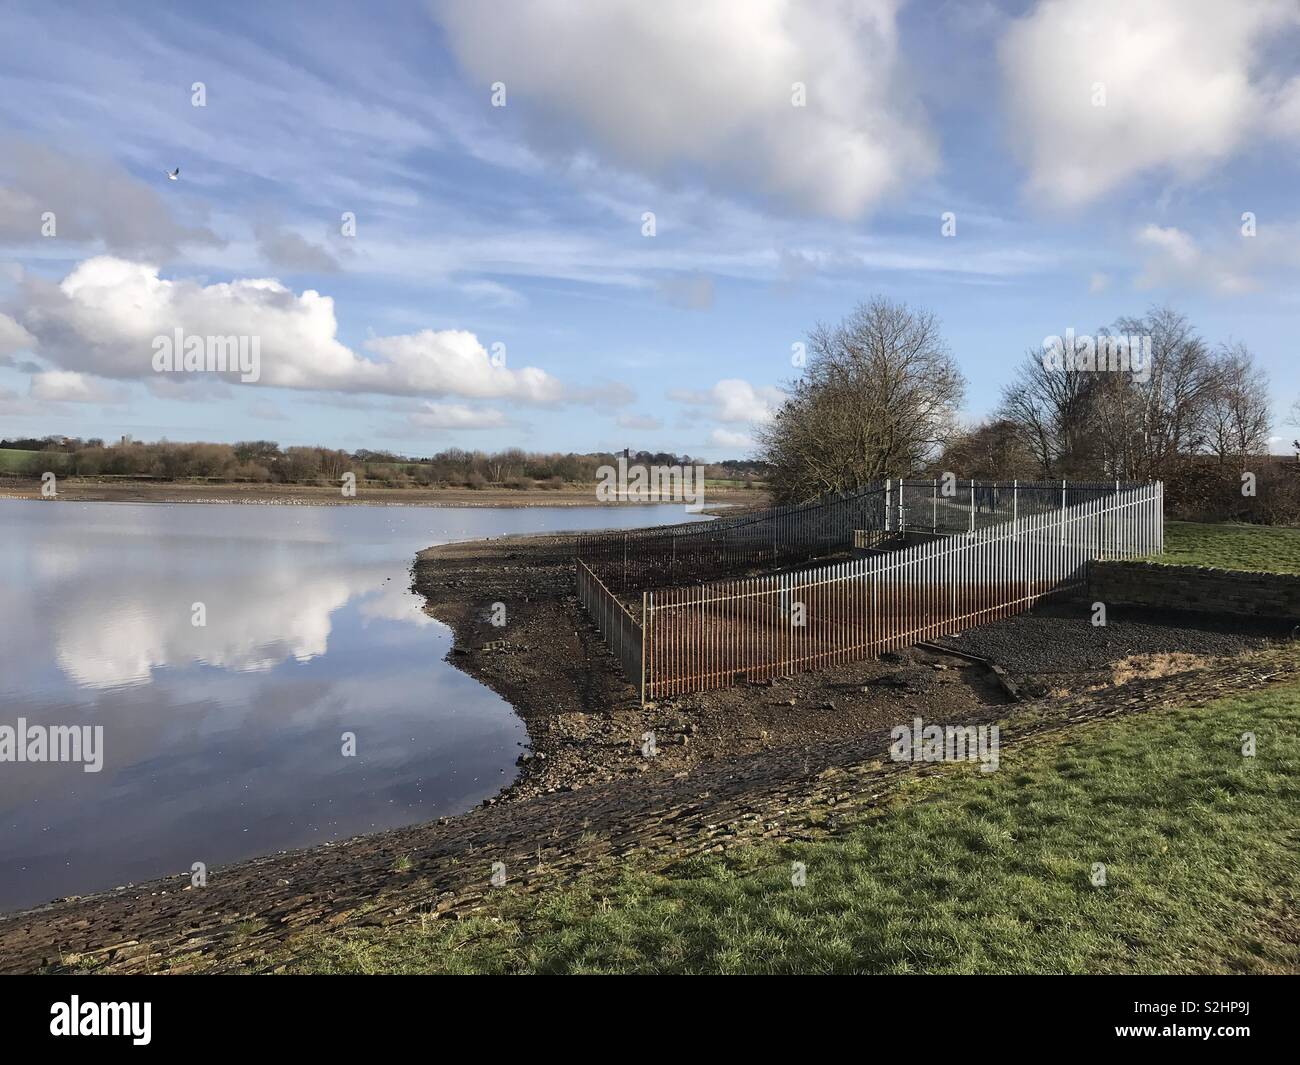 Very low water levels in a holding reservoir in East Ardsley, West Yorkshire, England. The water is usually over the left hand side railings. Stock Photo